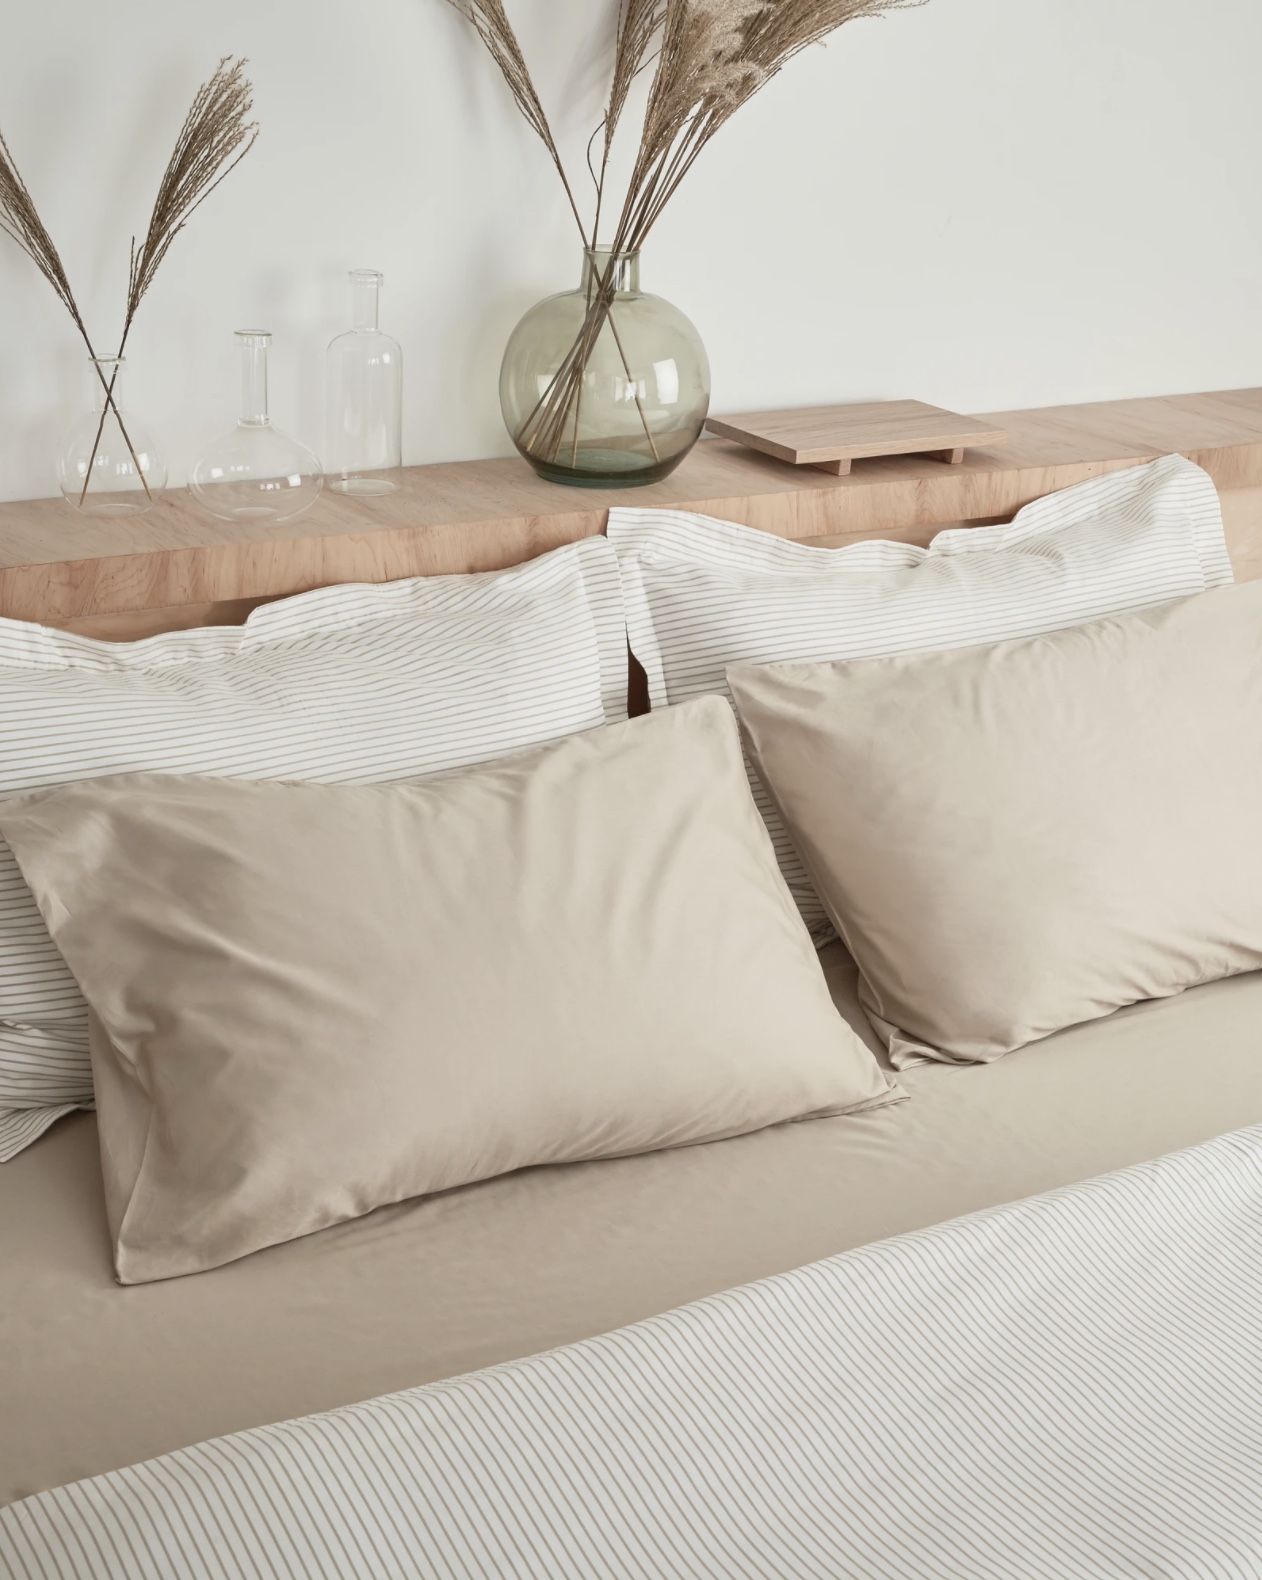 Sustainable Canadian Bedding Brands, Best Linen Duvet Cover Canada